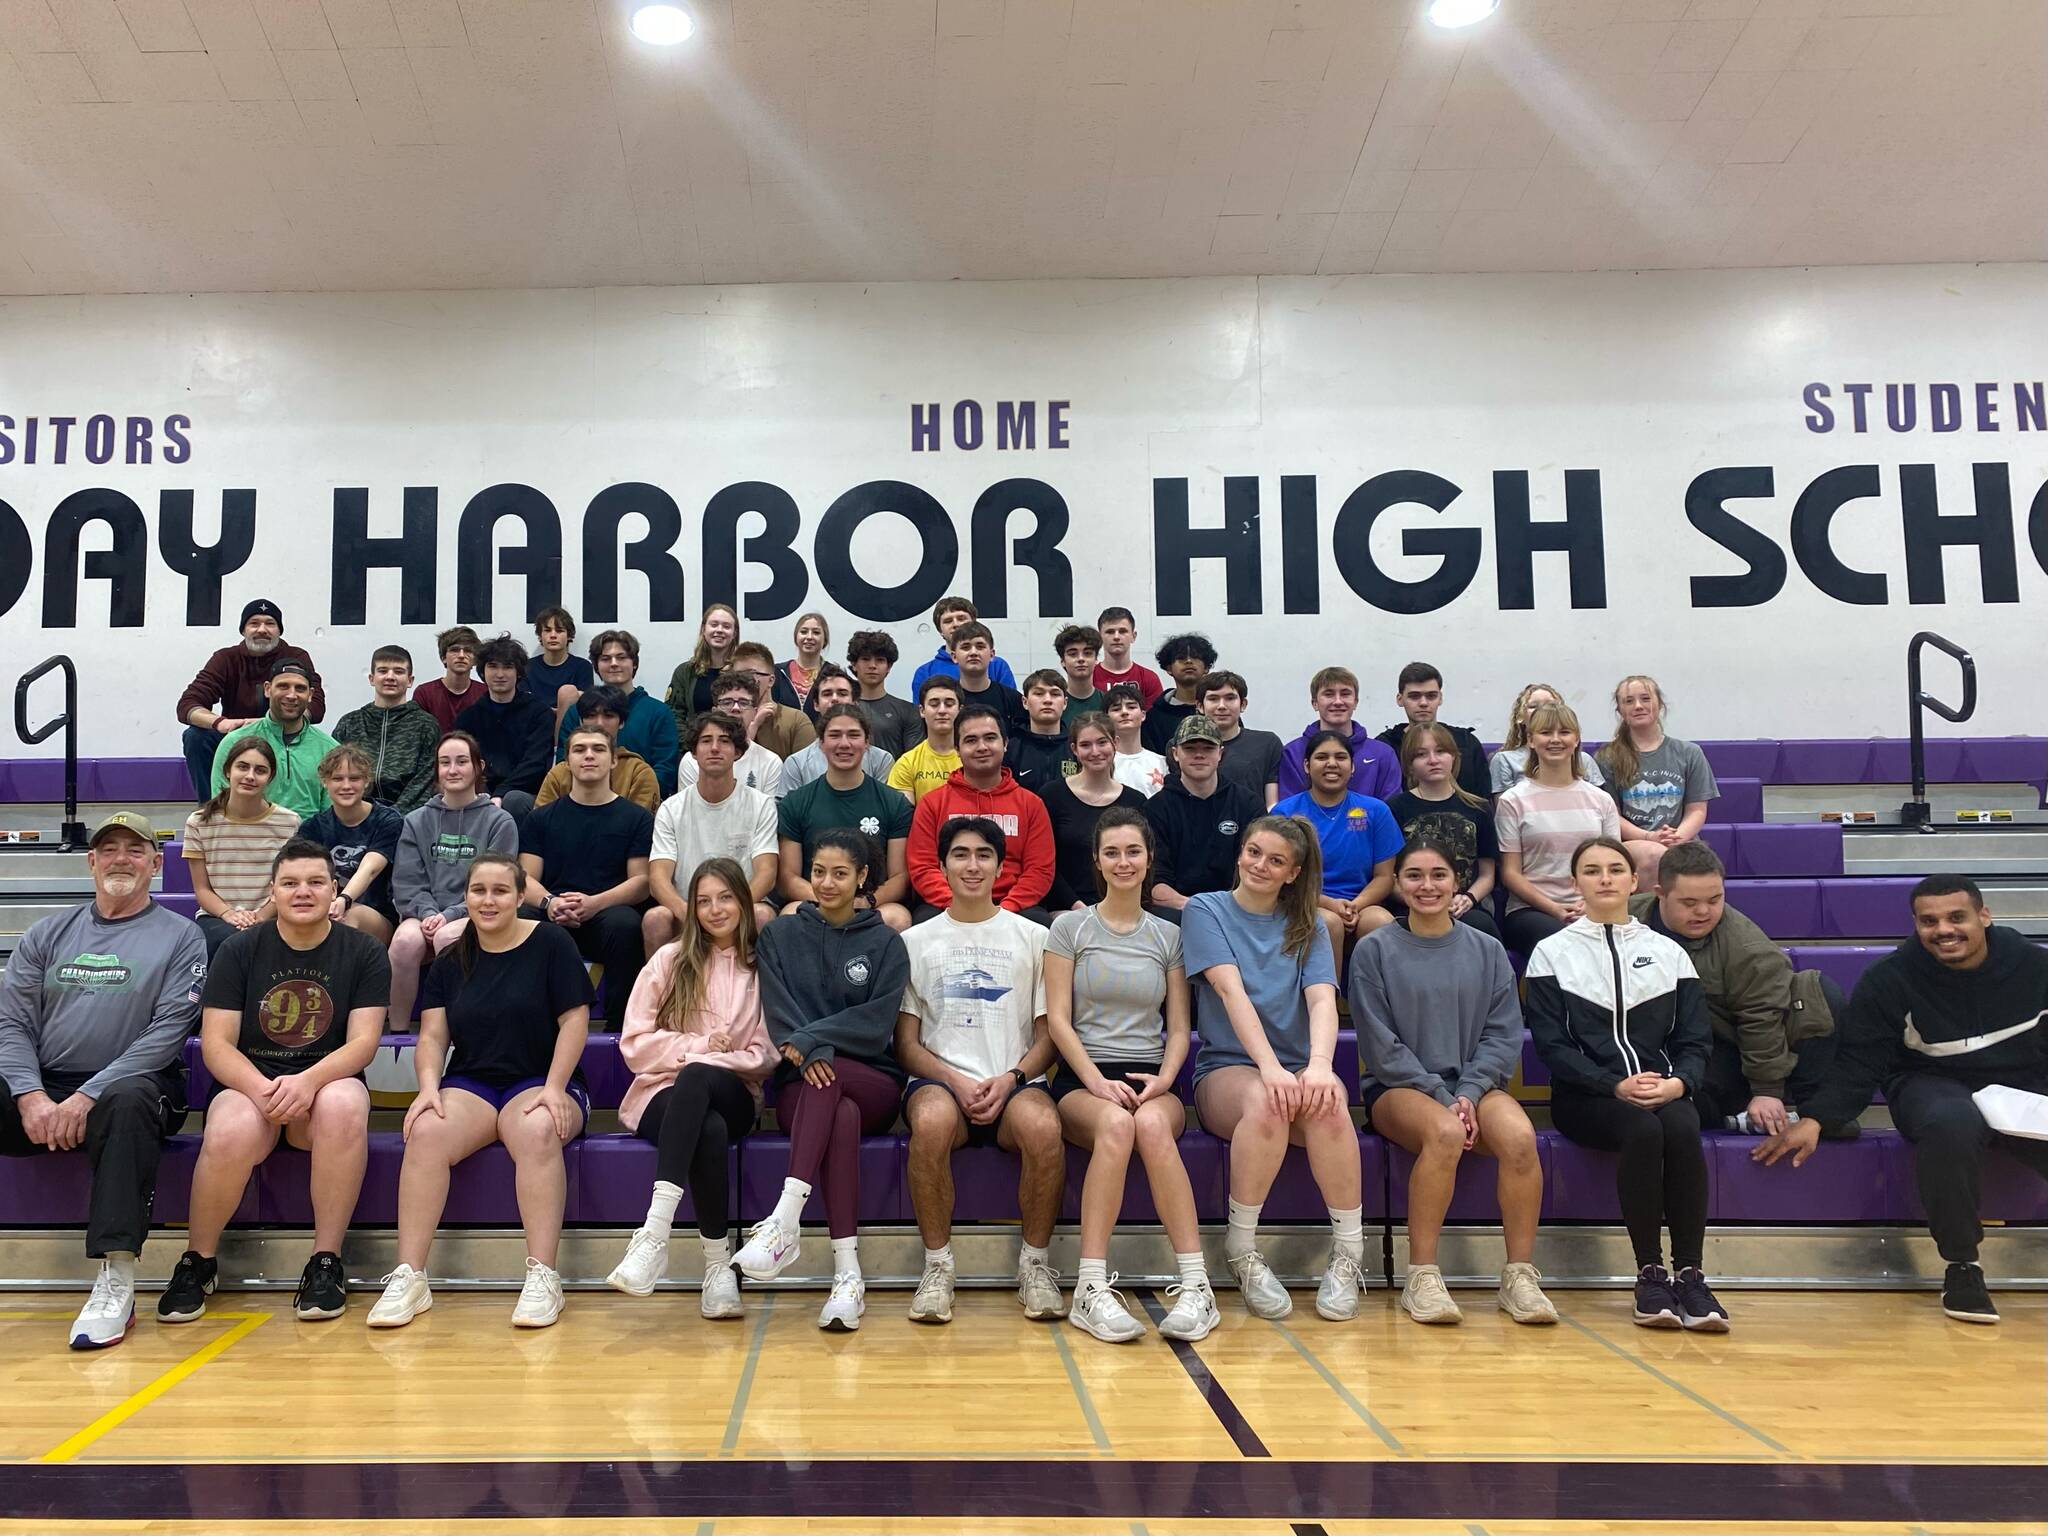 FHHS track and field team in attendance at Feb. 28 practice